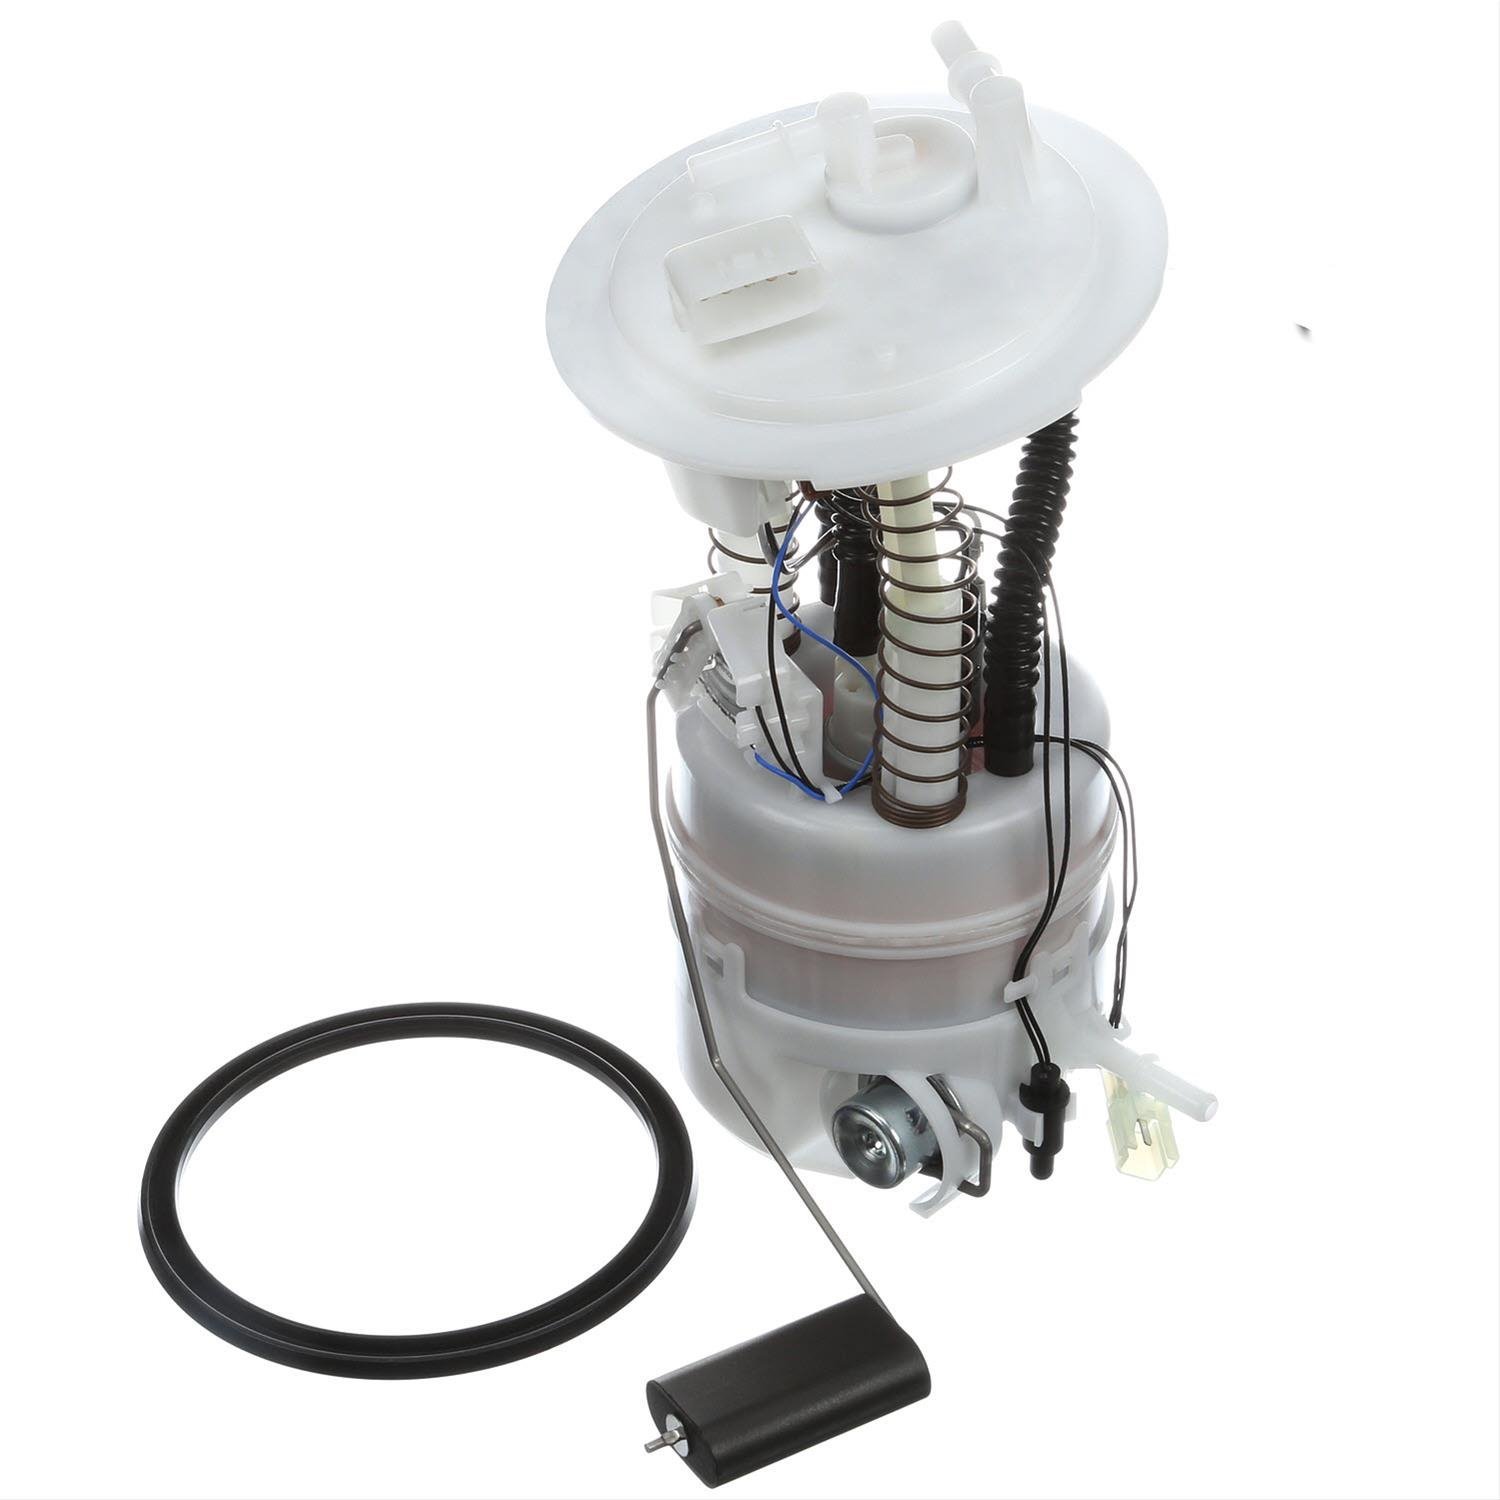 OE Replacement Fuel Pump Module Assembly for 2009-2014 Nissan Murano